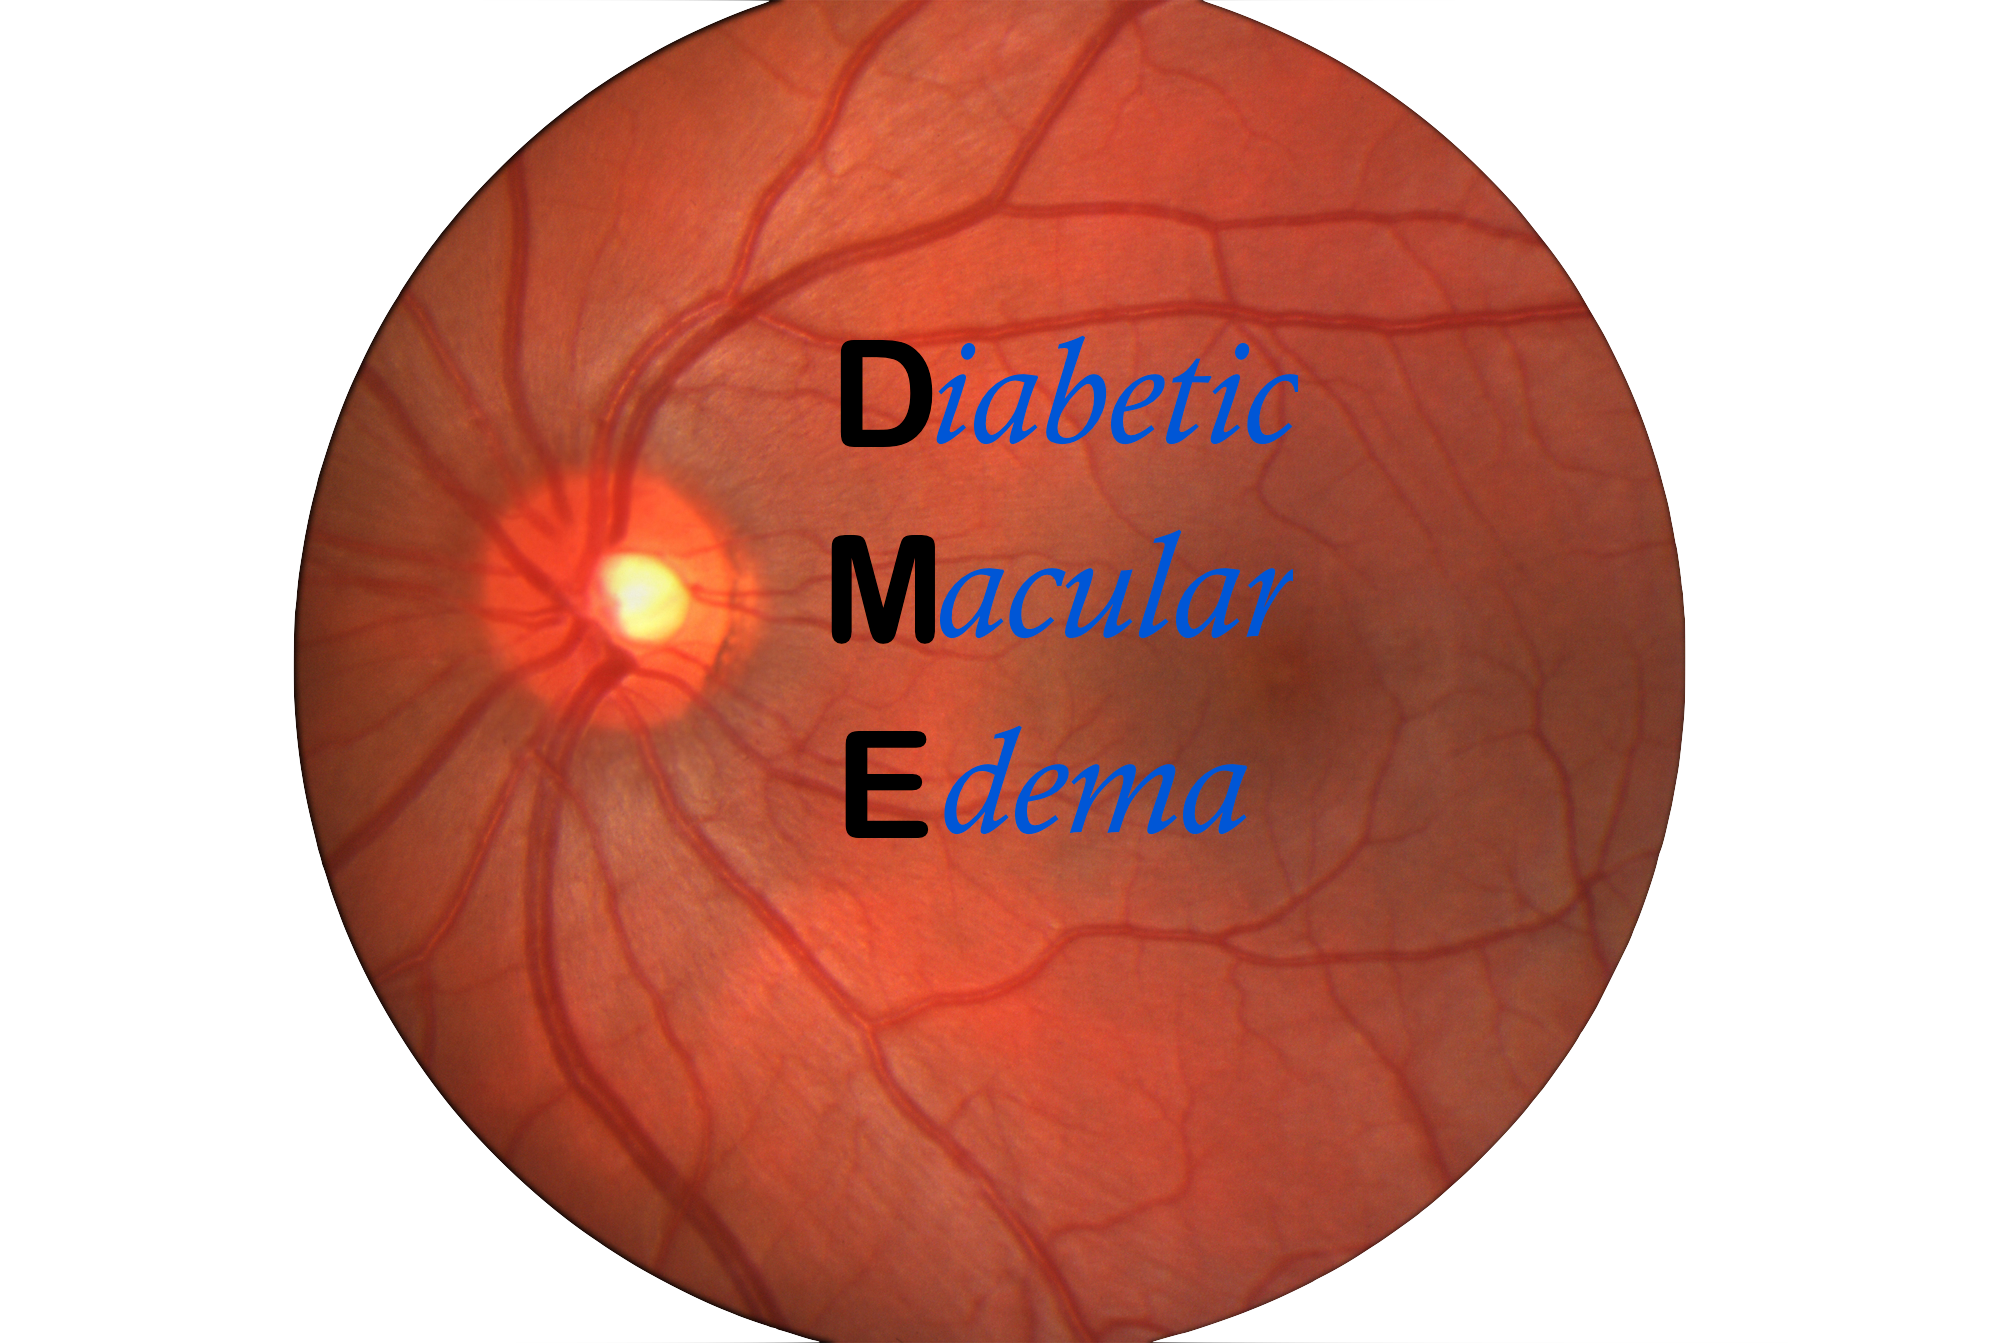 Assessment of Biomarker Profile in Diabetic Macular Edema With Intravitreal Aflibercept Injection